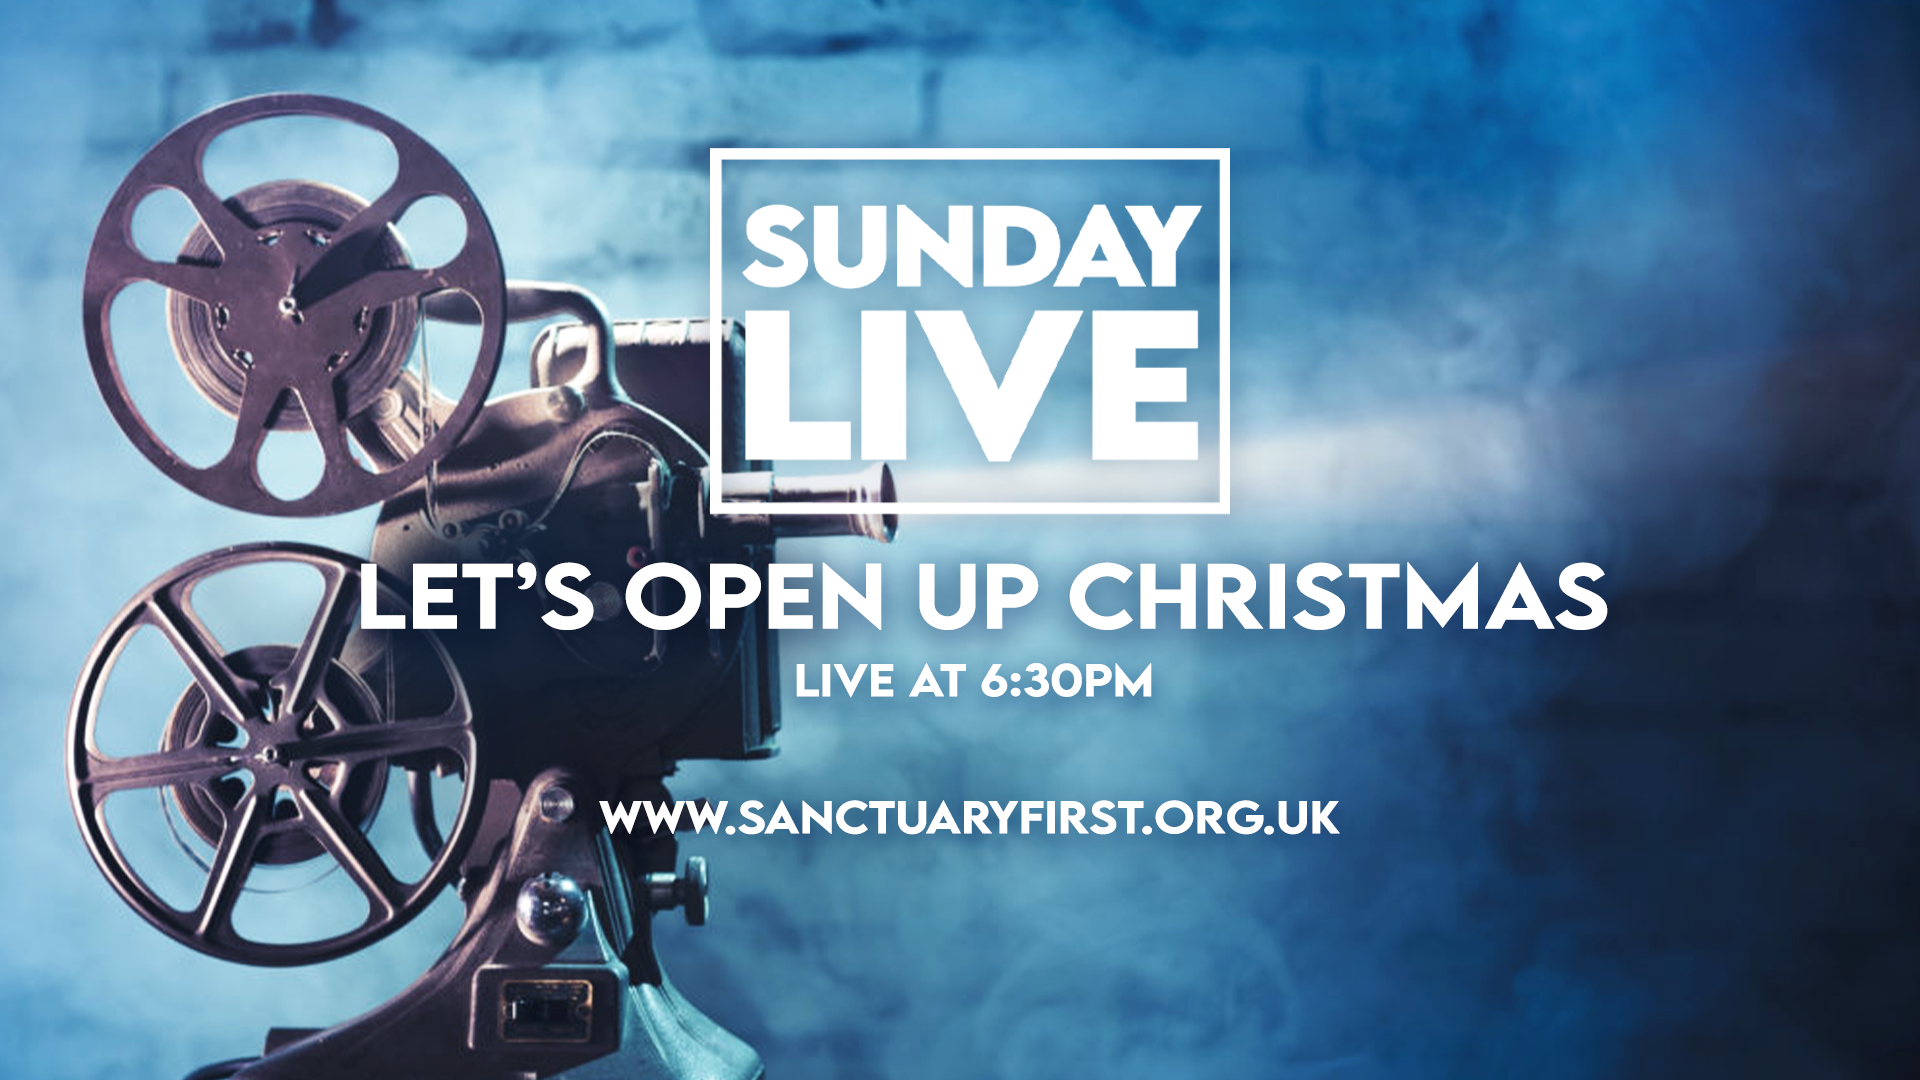 Sunday Live - Let’s Open up Christmas